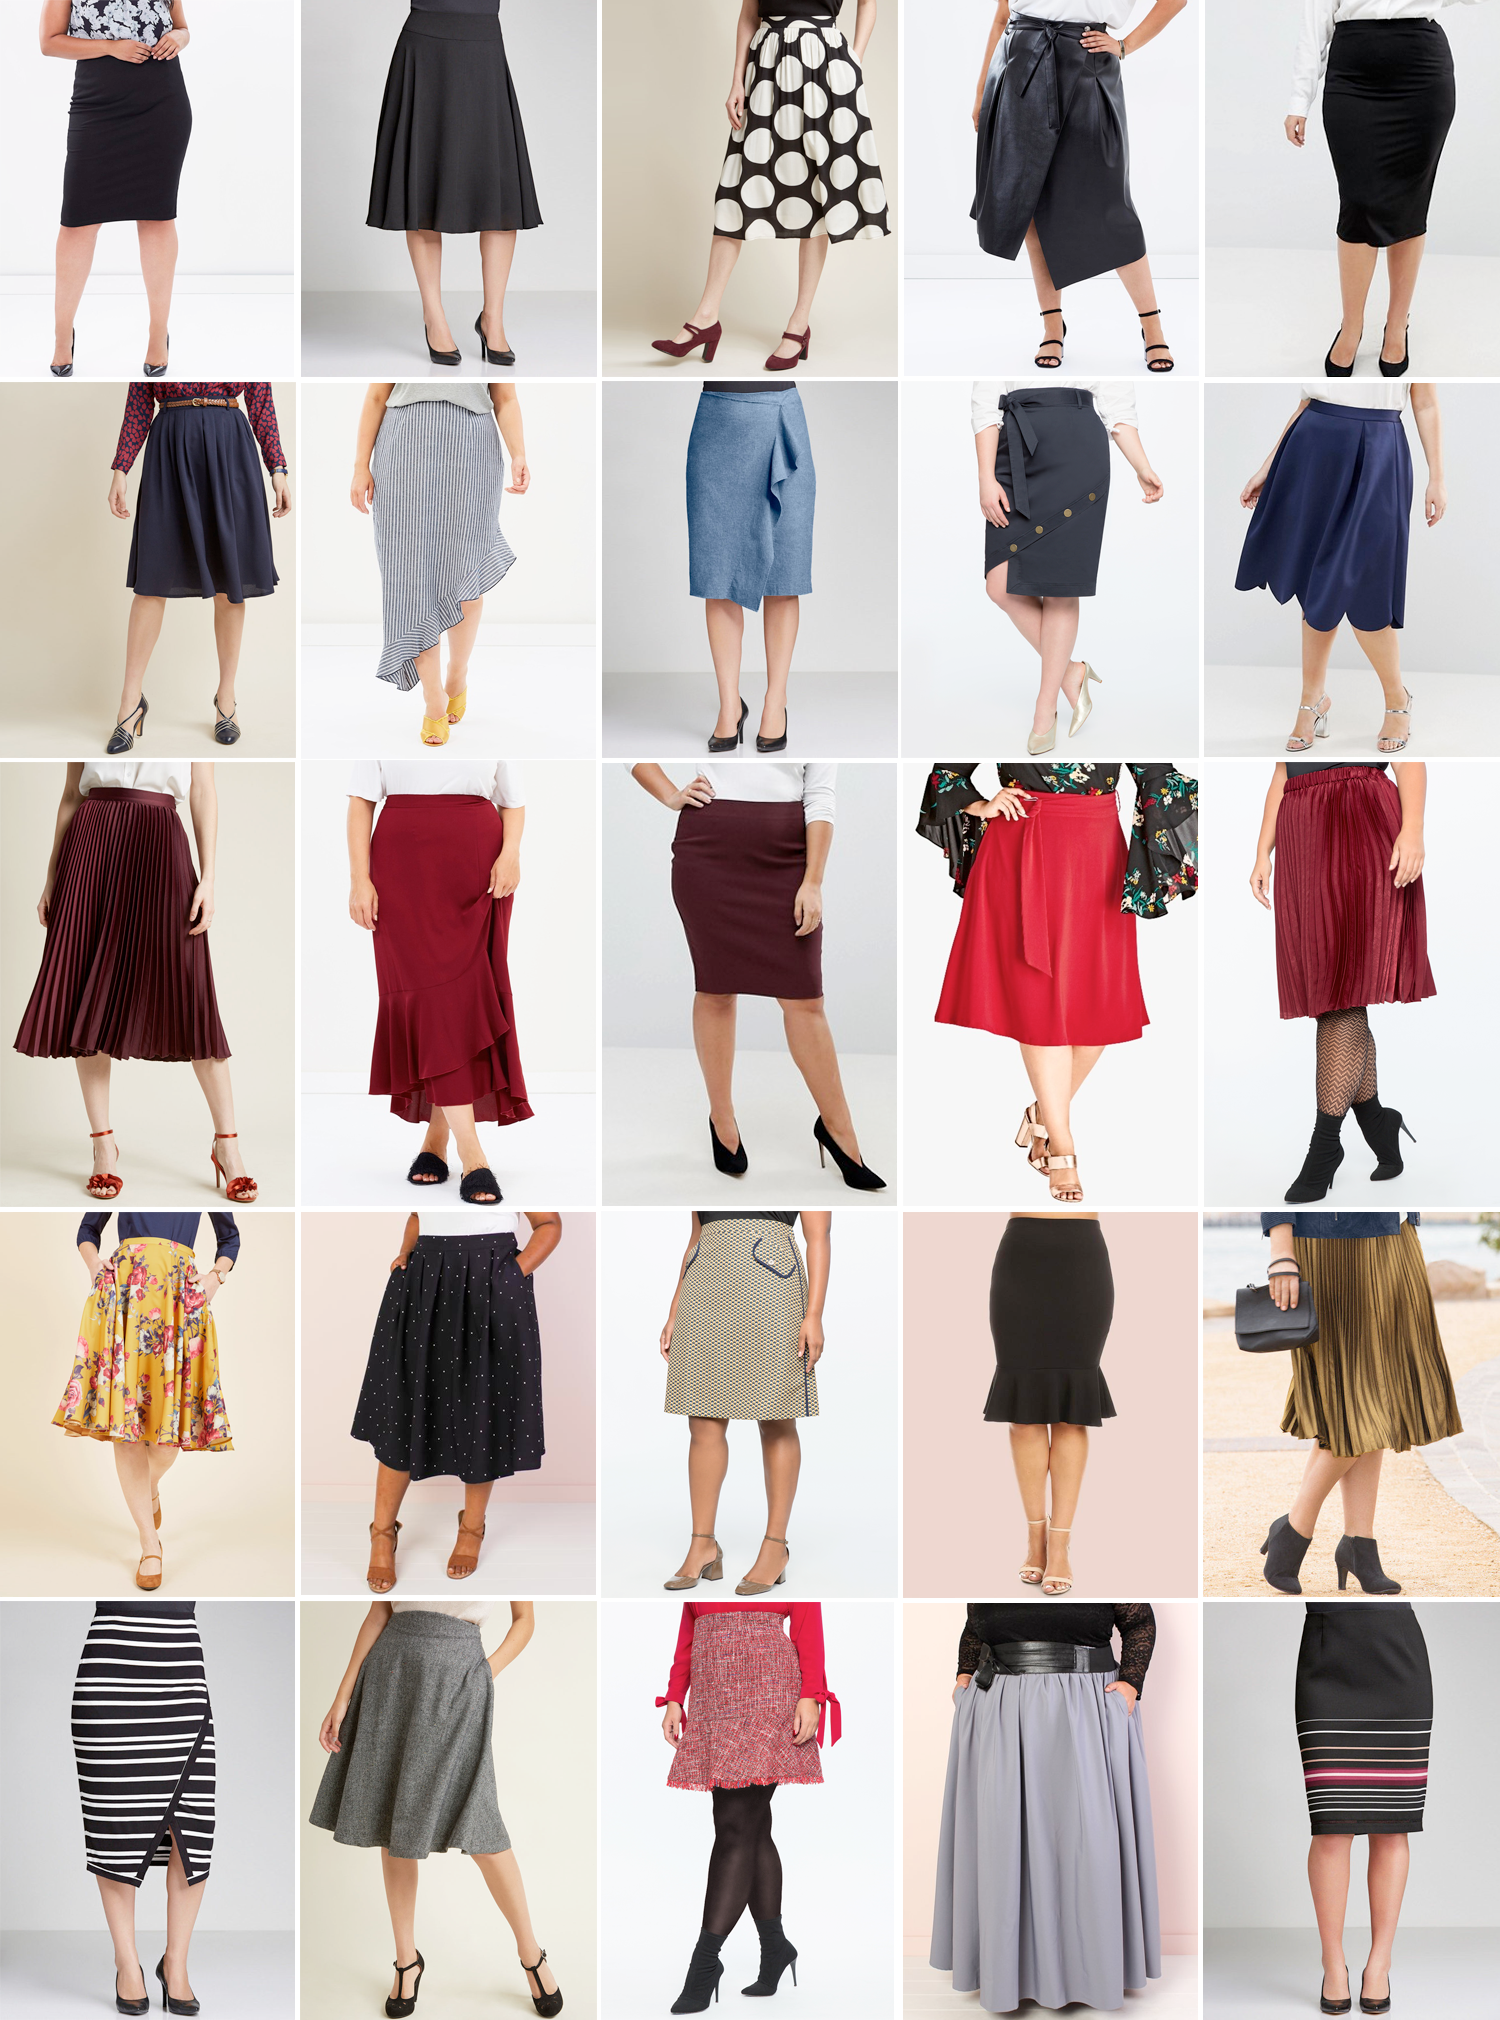 Plus size workwear skirts // Row 1 L-R: Atmos&Here Curvy Malia Jersey Pencil Skirt, AUD $29.95 from The Iconic; Sara Basque Panel Skirt, $49.00 from EziBuy; Woven A-Line Skirt with Pockets, USD $69.00 from ModCloth; Alison Dominy Karen Pleated Faux Leather Skirt, AUD $150.00 from The Iconic; ASOS CURVE Jersey Pencil Skirt, $21.85 from ASOS. Row 2 L-R: Breathtaking Tiger Lilies Midi Skirt, USD $22.97 from ModCloth; Atmos&Here Curvy Coco Ruffle Skirt, AUD $54.95 from The Iconic; Sara Ruffle Skirt, $49.00 from EziBuy; Button Hem Pencil Skirt, USD $89.90 from Eloquii; ASOS CURVE Prom Skirt with Scallop Hem, AUD $60.00 from ASOS. Row 3 L-R: Polished Pleated Midi Skirt, USD $69.00 from ModCloth; EVANS Ruffle Hem Skirt, AUD $69.95 from The Iconic; ASOS CURVE High Waisted Pencil Skirt, AUD $36.00 from ASOS; Joyful Skirt, $99.99 from City Chic; Pleated Midi Skirt, USD $69.90 from Eloquii. Row 4 L-R: Ikebana for All A-Line Midi Skirt, USD $69.00 from ModCloth; Kate Midington Skirt, USD $35.99 from Society+; Printed A-Line Skirt with Piping, USD $79.90 from Eloquii; Mellie Super Stretch Ruffle Skirt, USD $17.99 from Society+; Sara Metallic Pleat Skirt, $35.00 from EziBuy. Row 5 L-R: Sara Midi Skirt, $69.99 from EziBuy; Prim Class Hero Midi Skirt, USD $65.00 from ModCloth; Tweed Fit and Flare Skirt, USD $89.90 from Eloquii; Twirl Maxi Skirt with Pockets, USD $41.99 from Society+; Sara Midi Stripe Skirt, $69.99 from EziBuy.